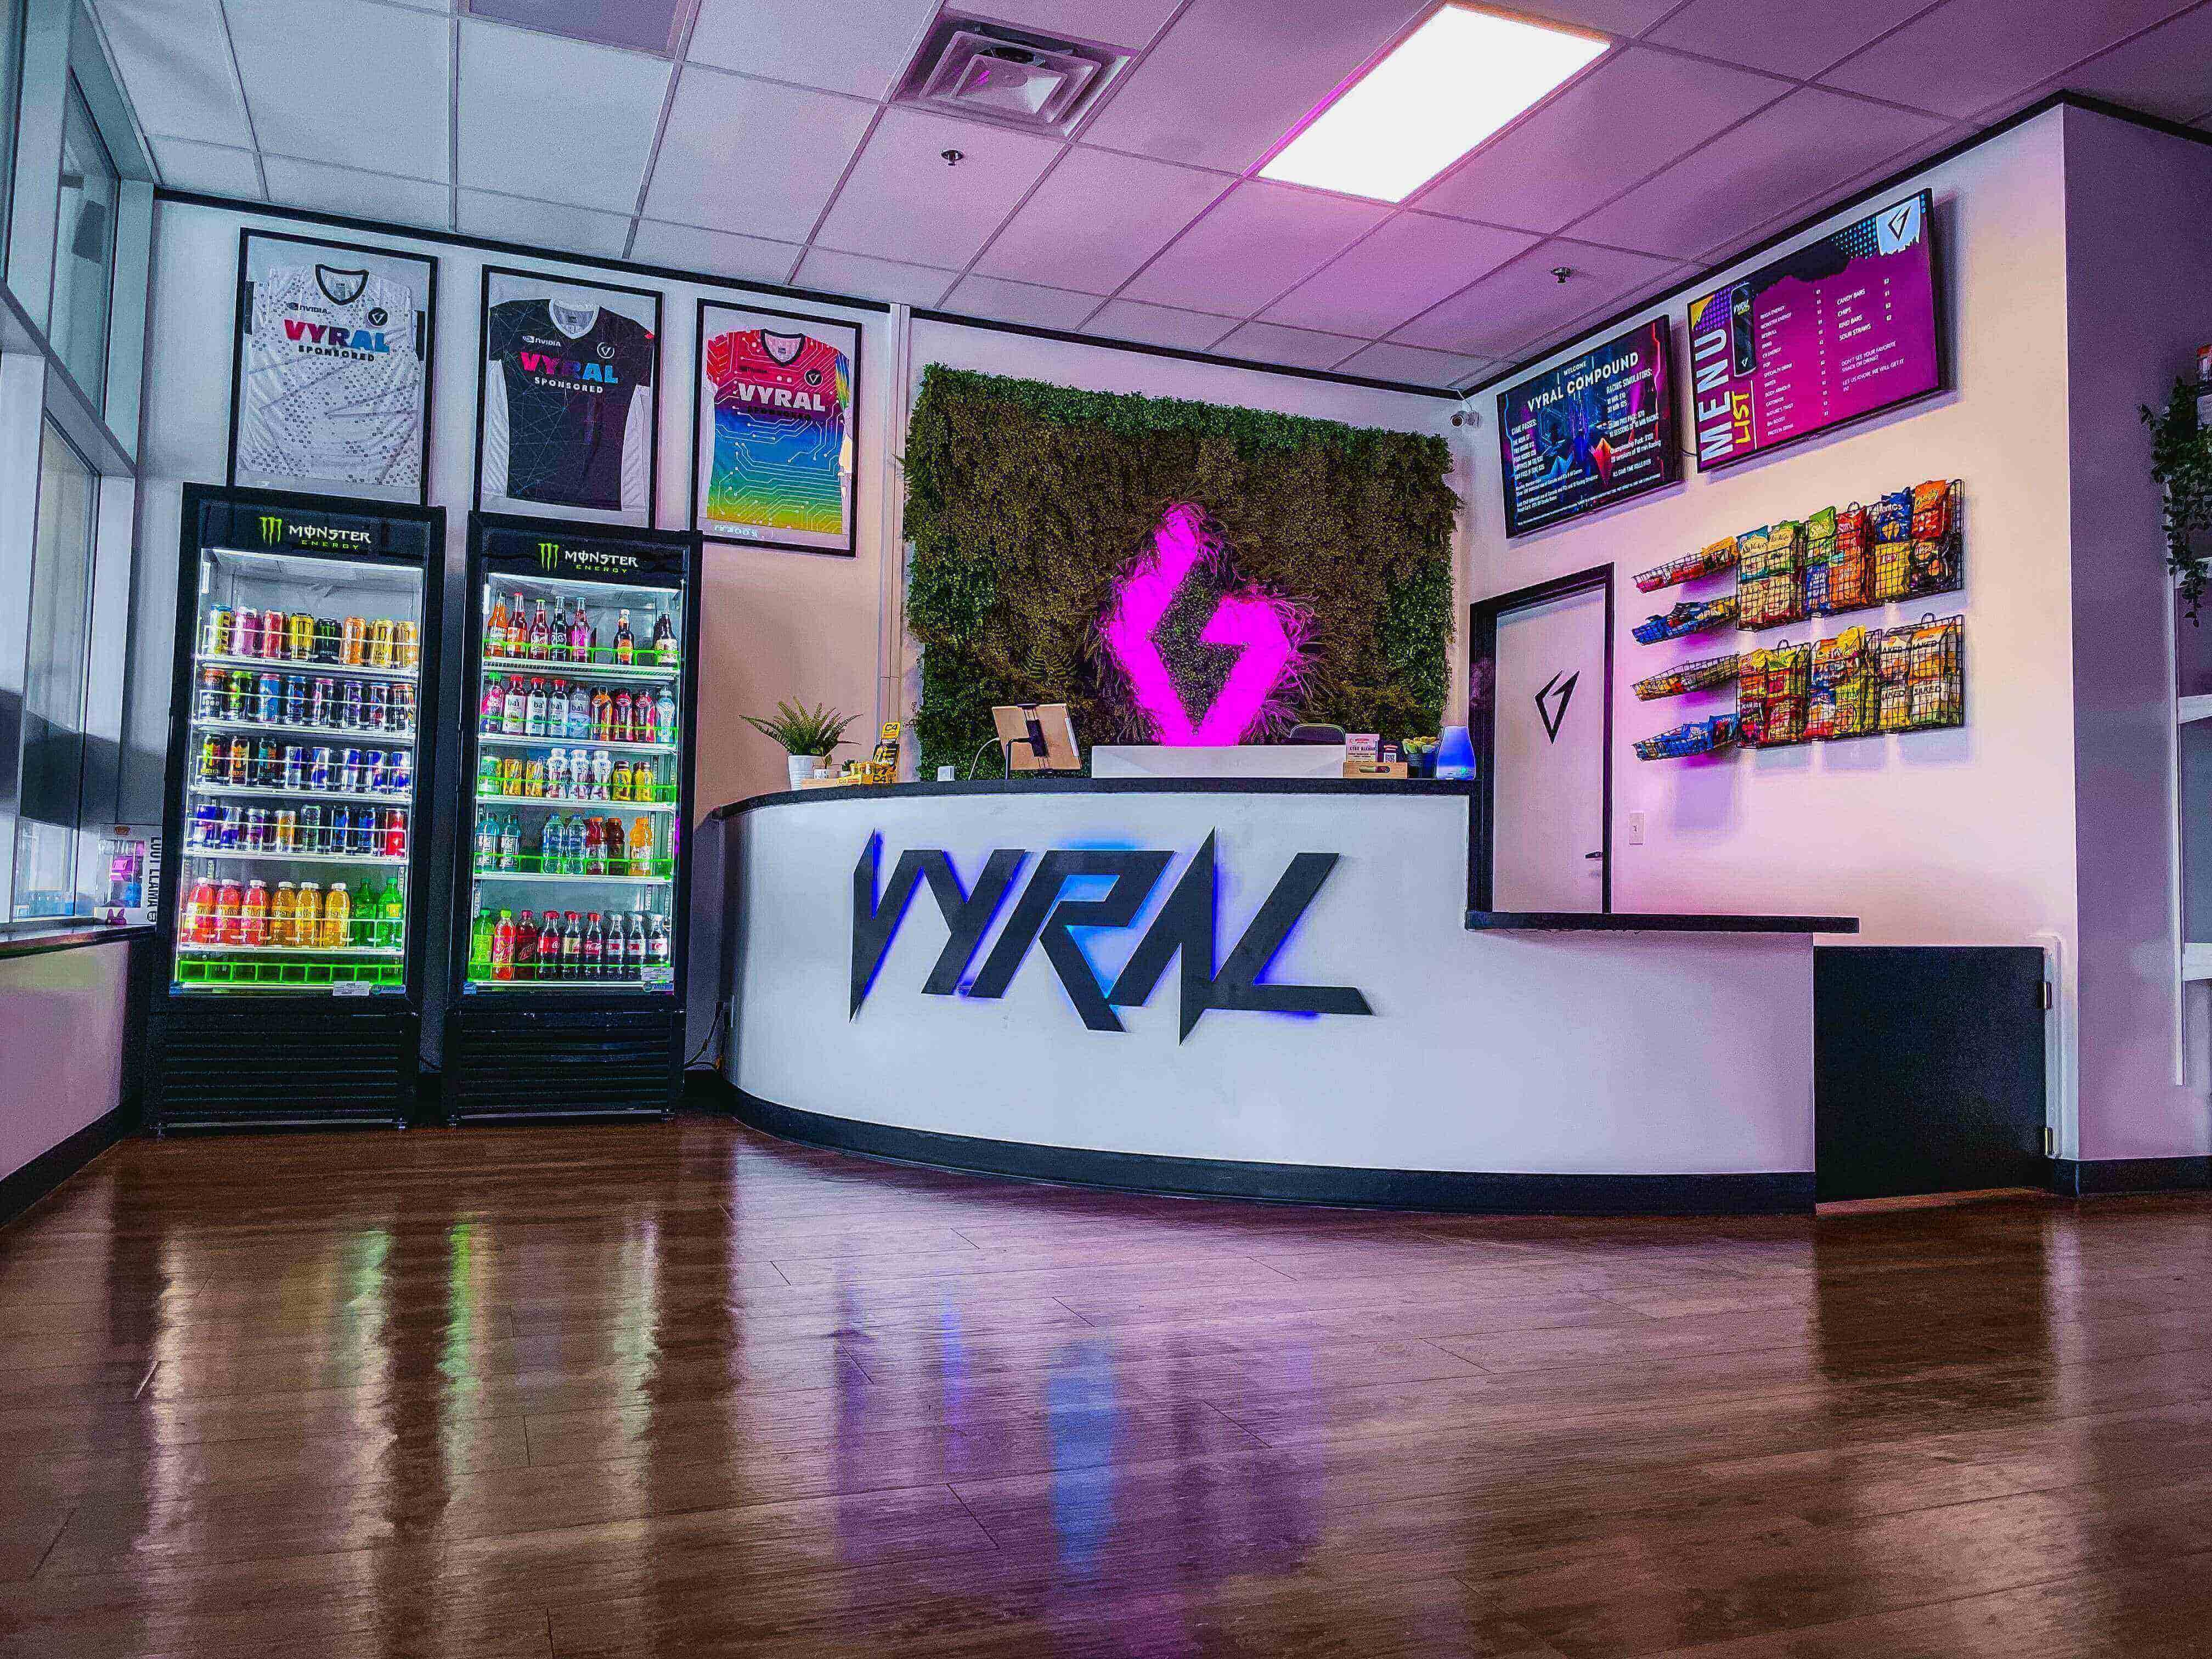 Vyral Teq Esports Venue Has Everything a Gamer Wants!